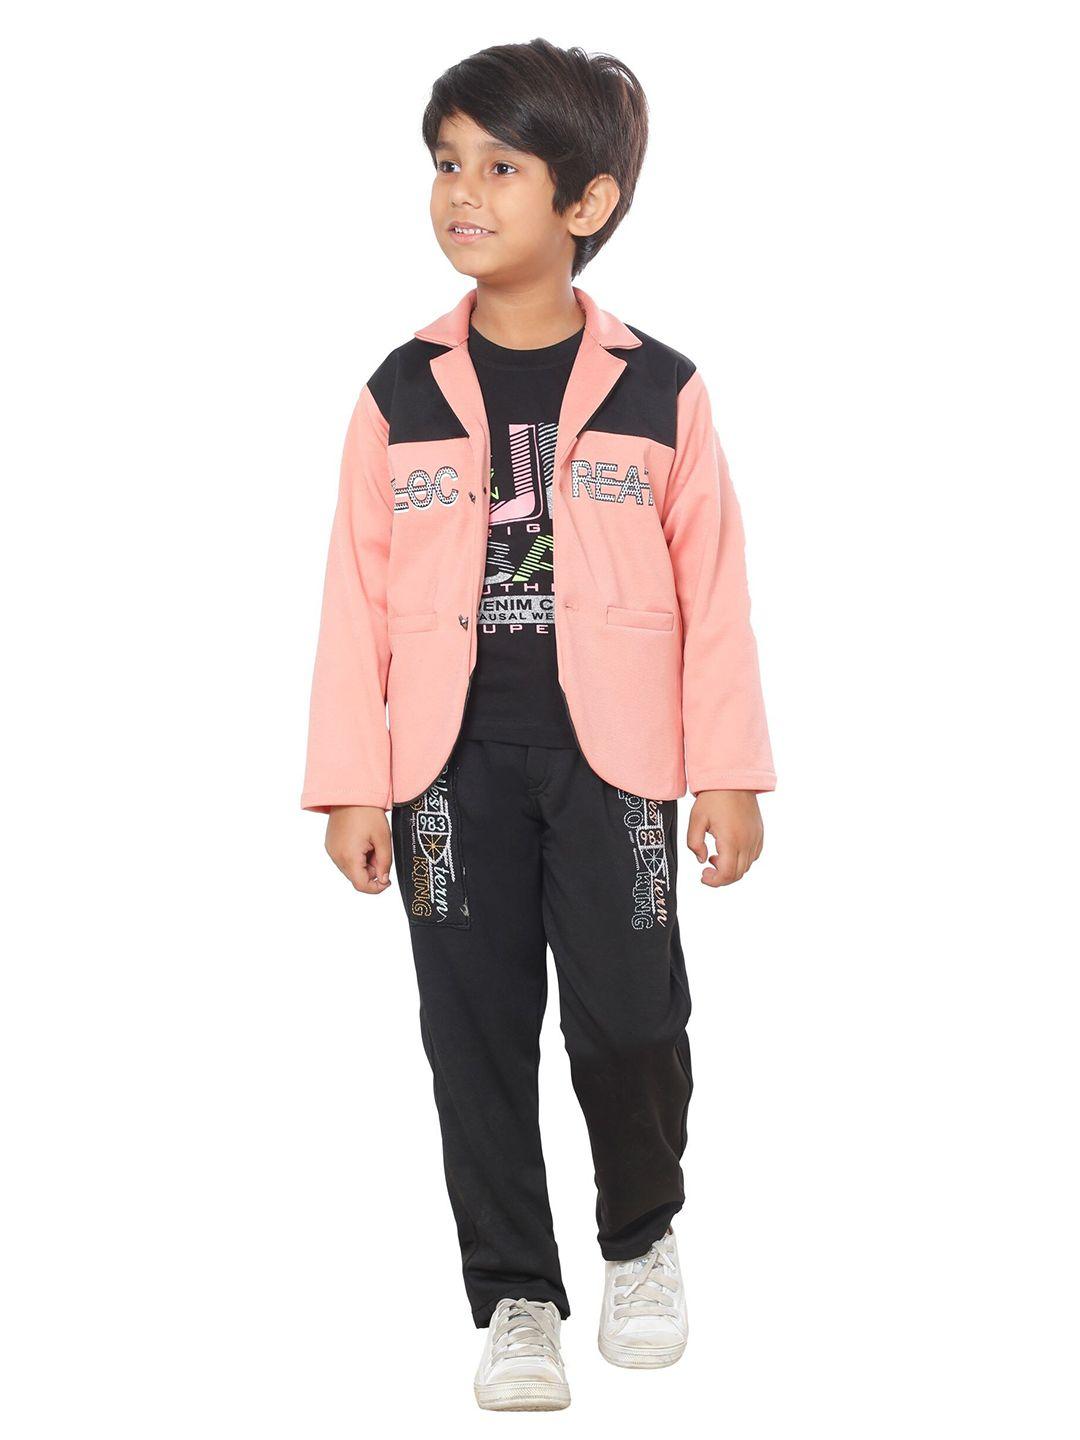 dkgf fashion boys pink & black t-shirt with trousers